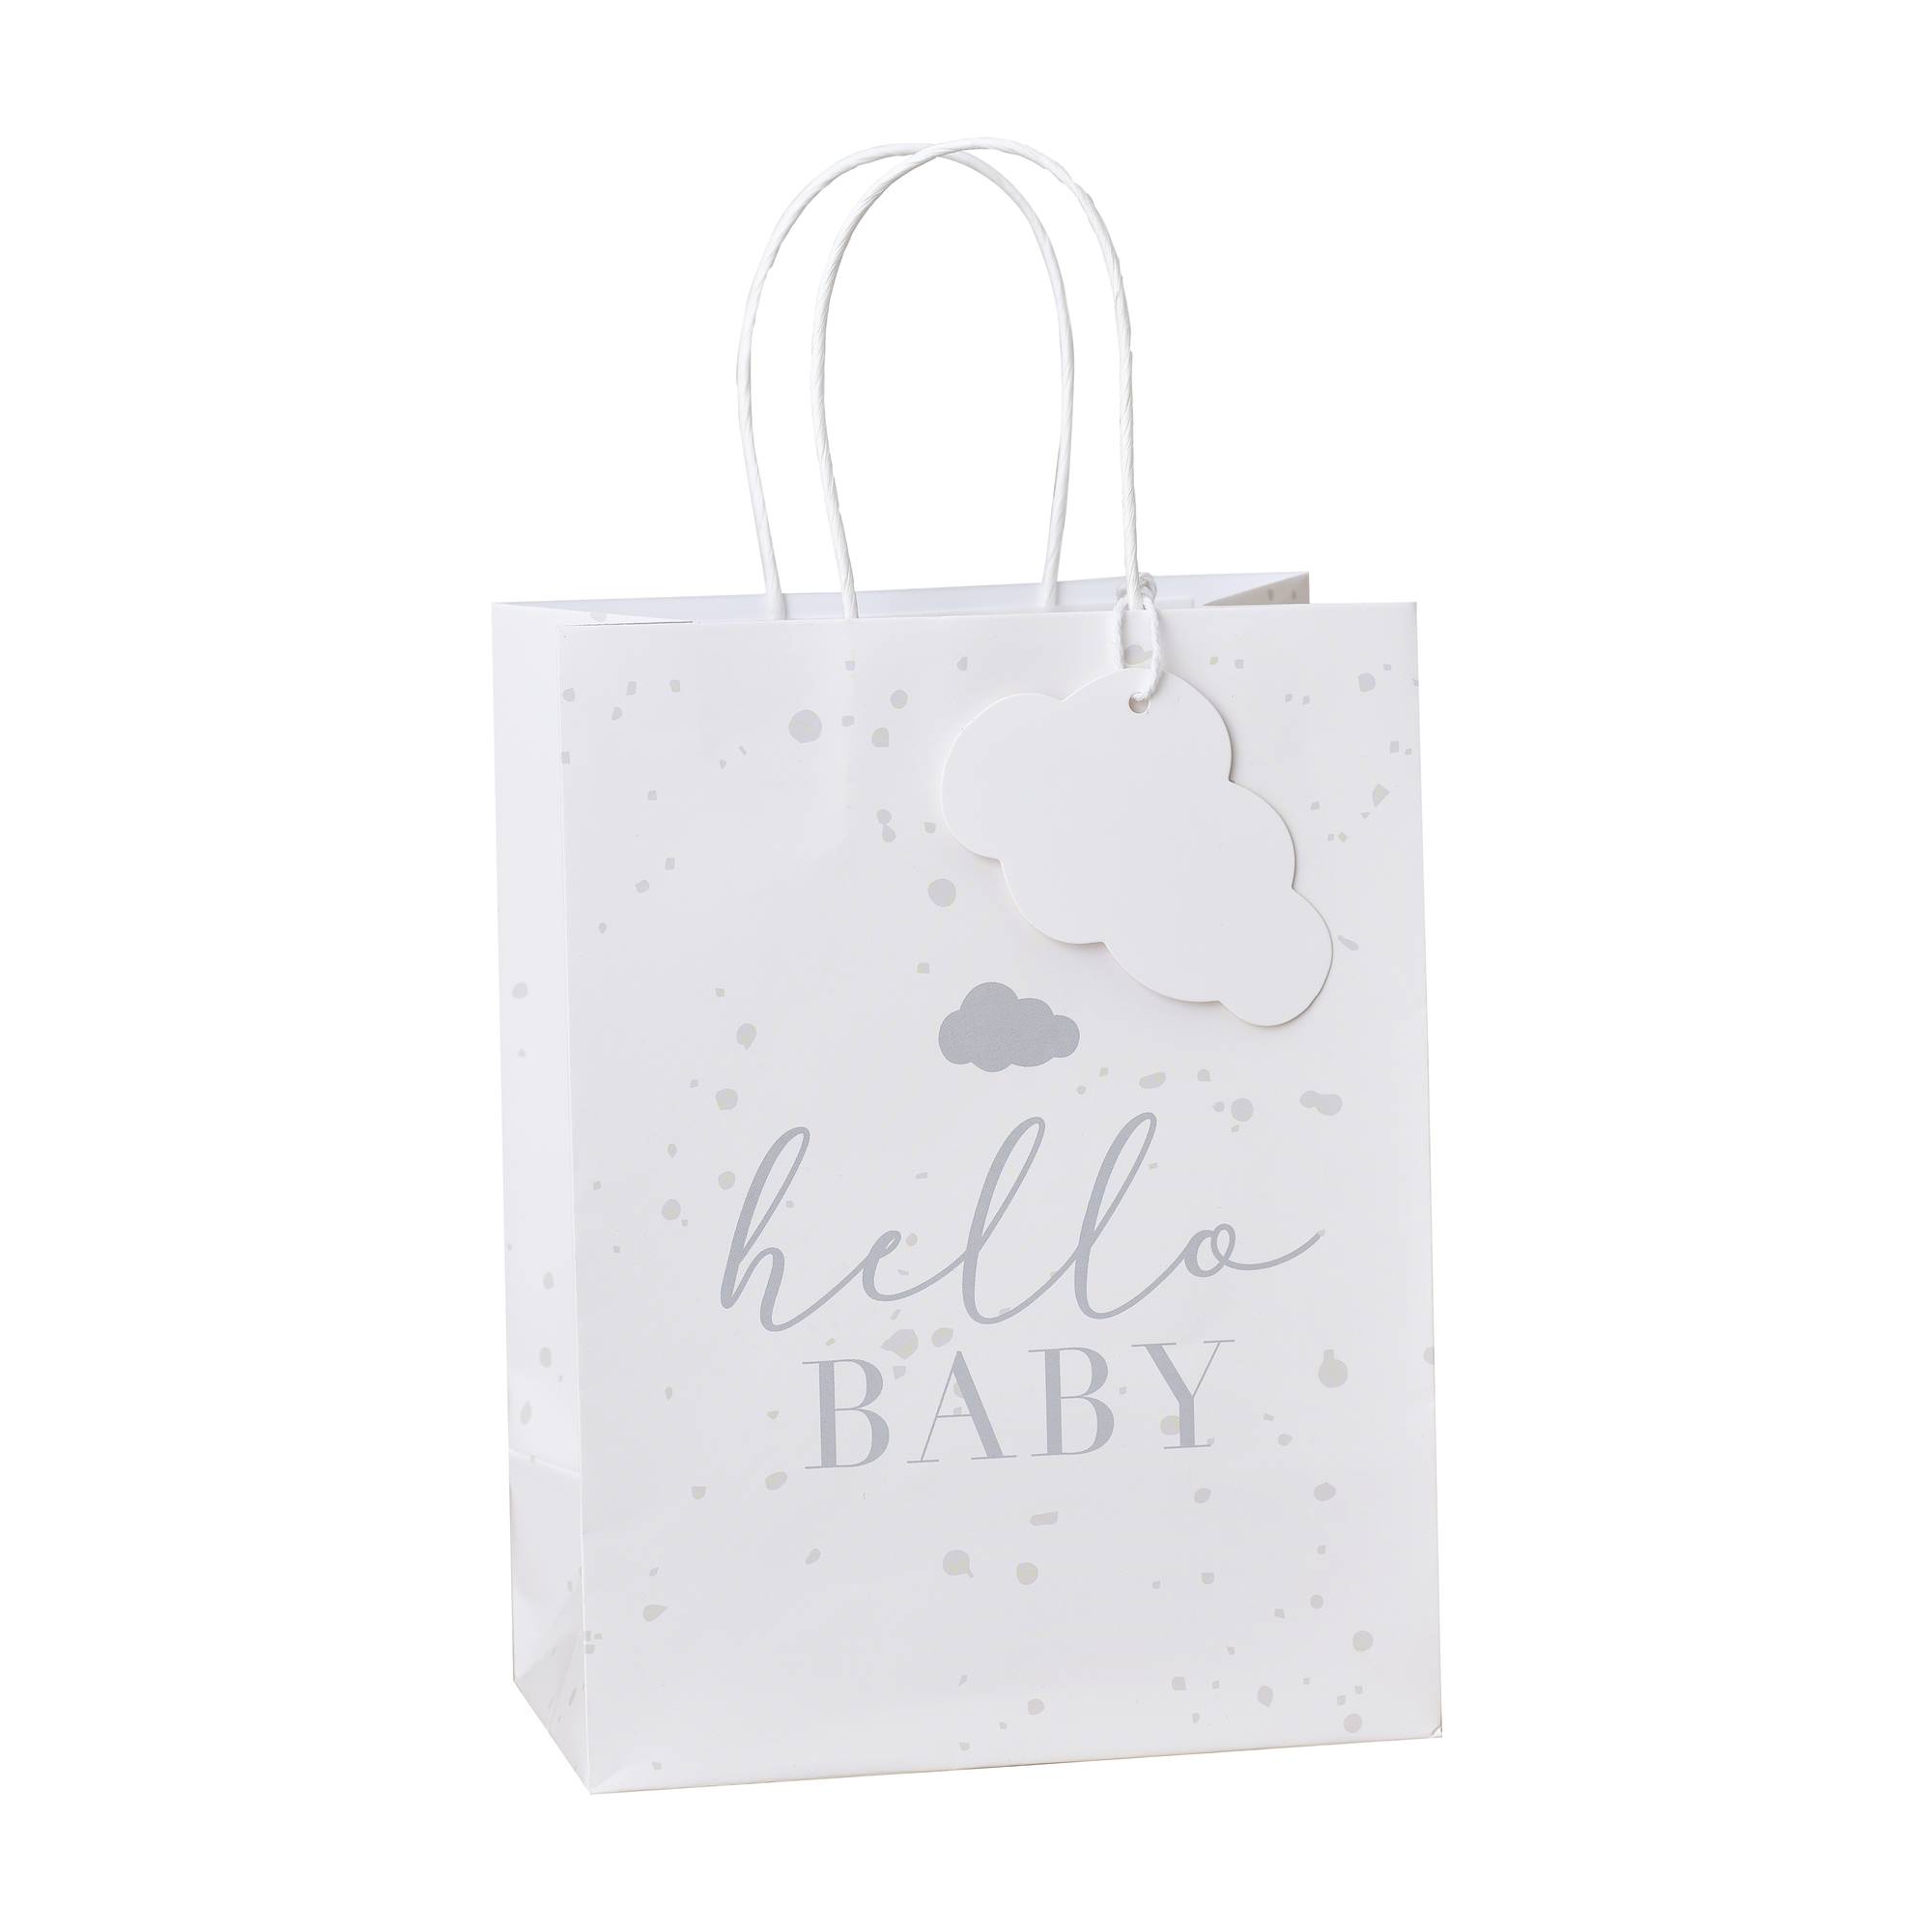 Personalized Baby Shower Gift Bags | Beau-coup